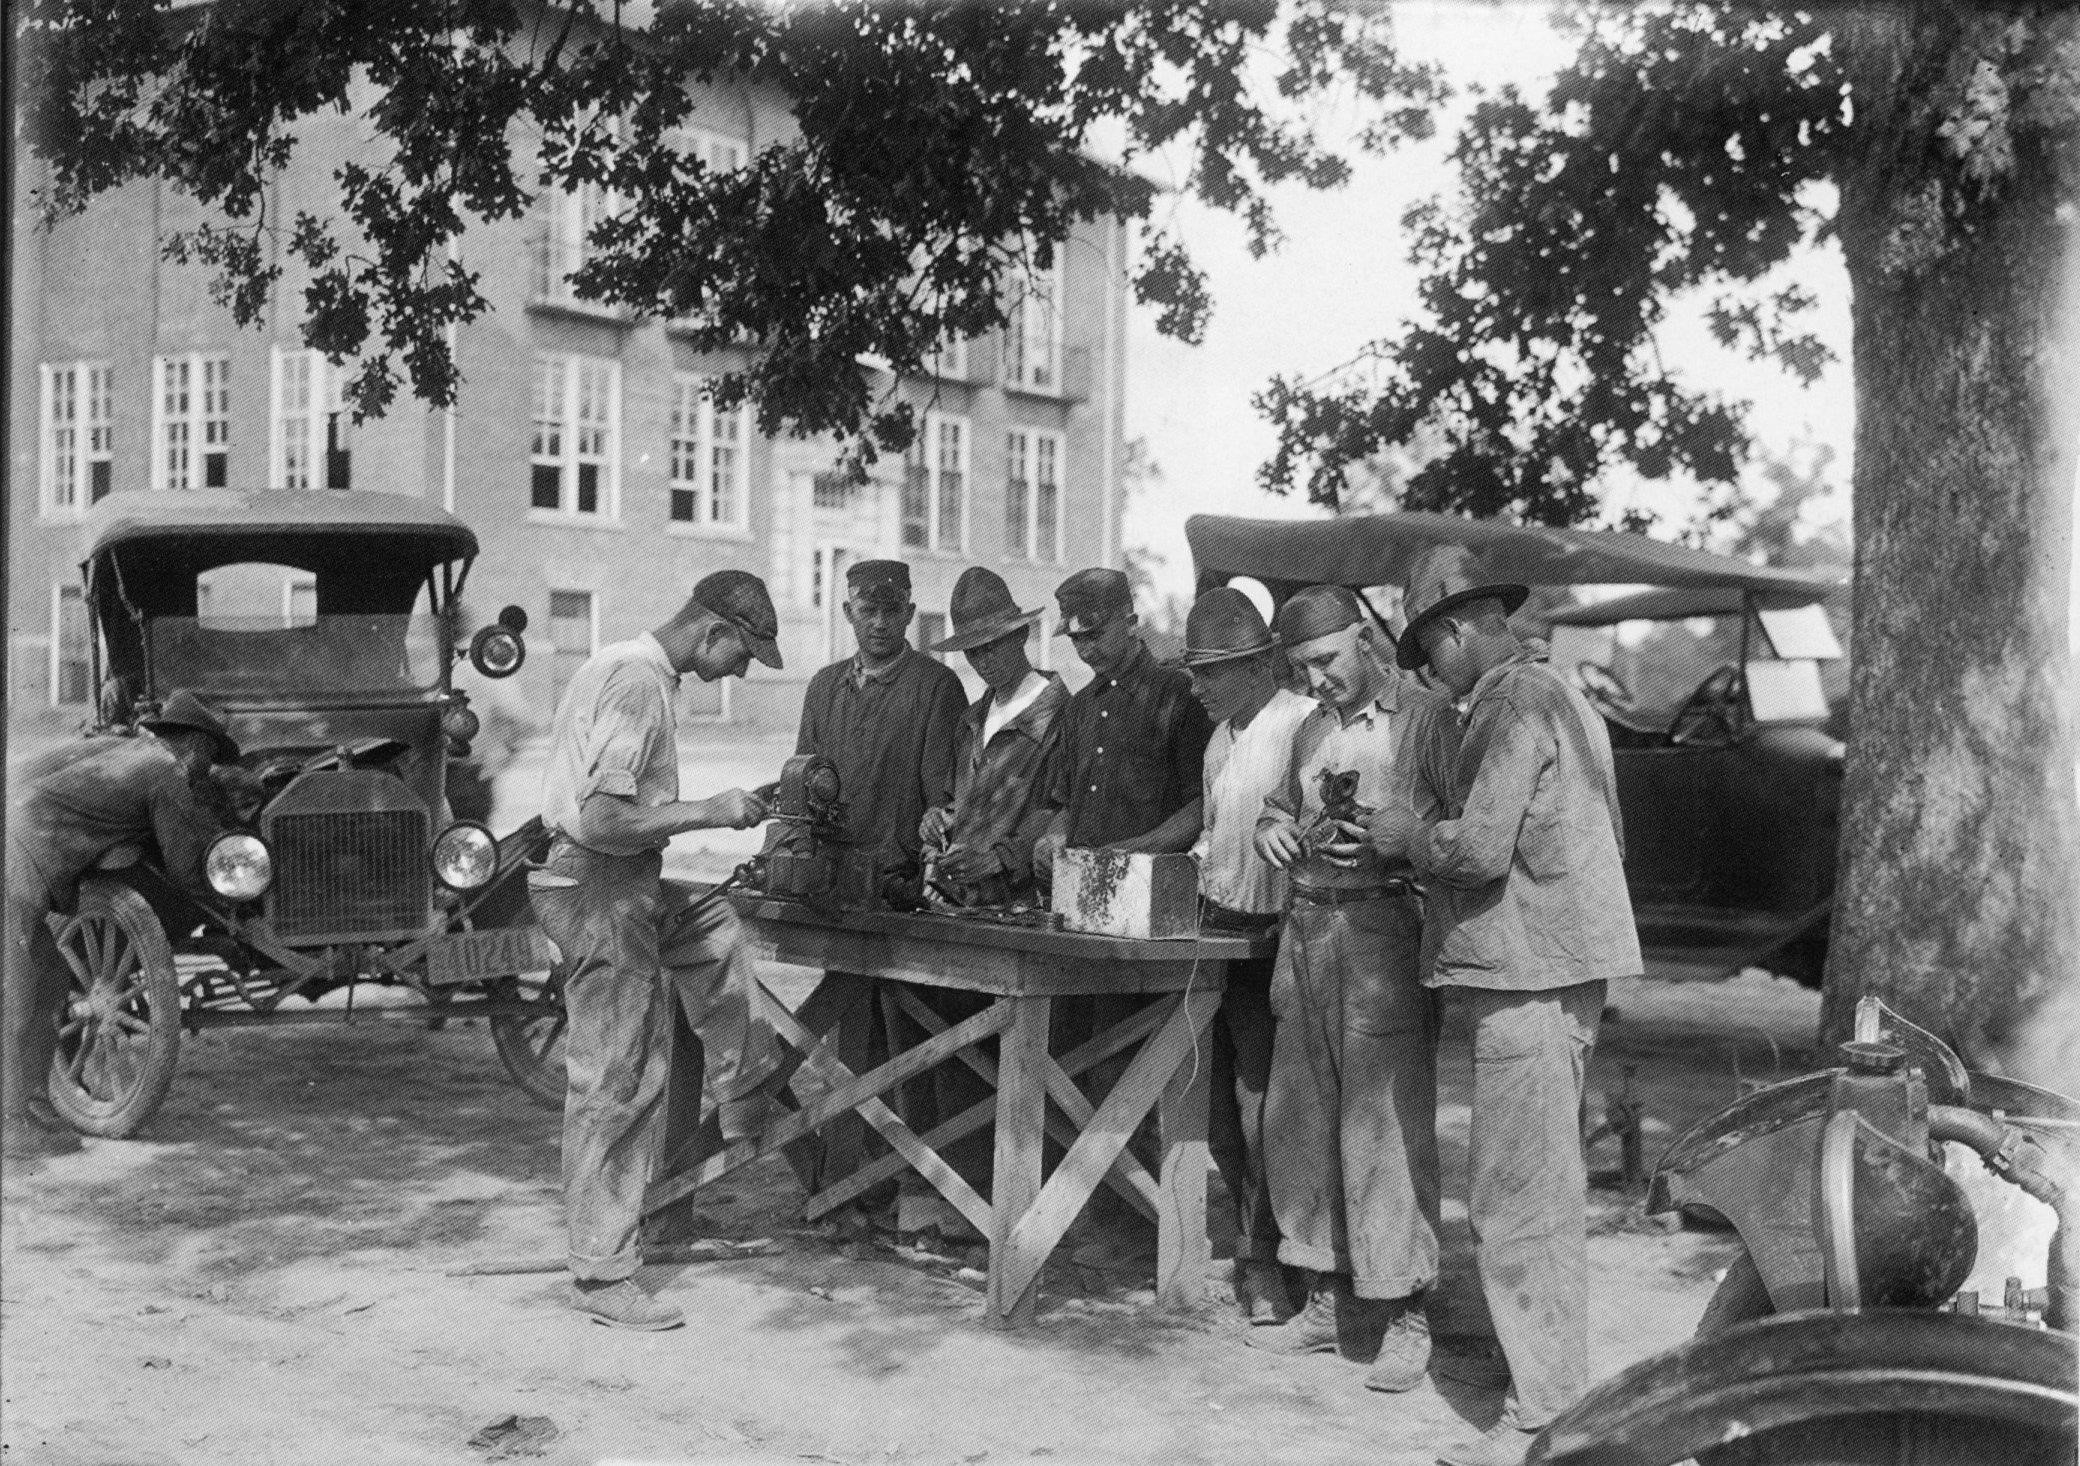 A black and white photo with a group of gentlemen standing around a workbench with 20s cars behind them.